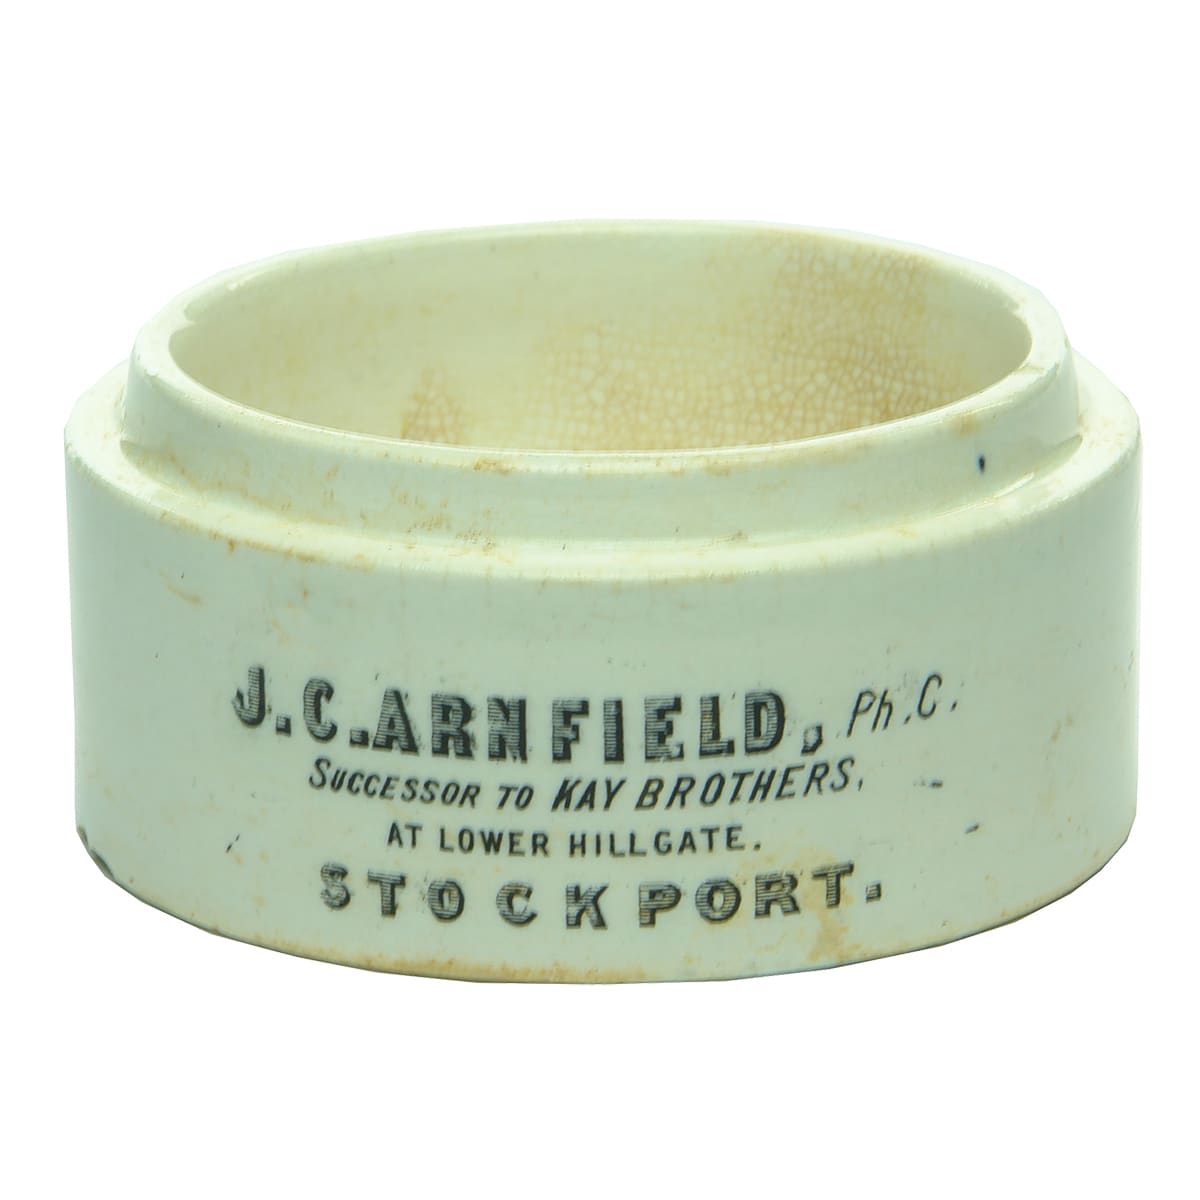 Pot Base. Arnfield, Successor to Kay Brothers, Stockport. Toogood Patent. Black on White.